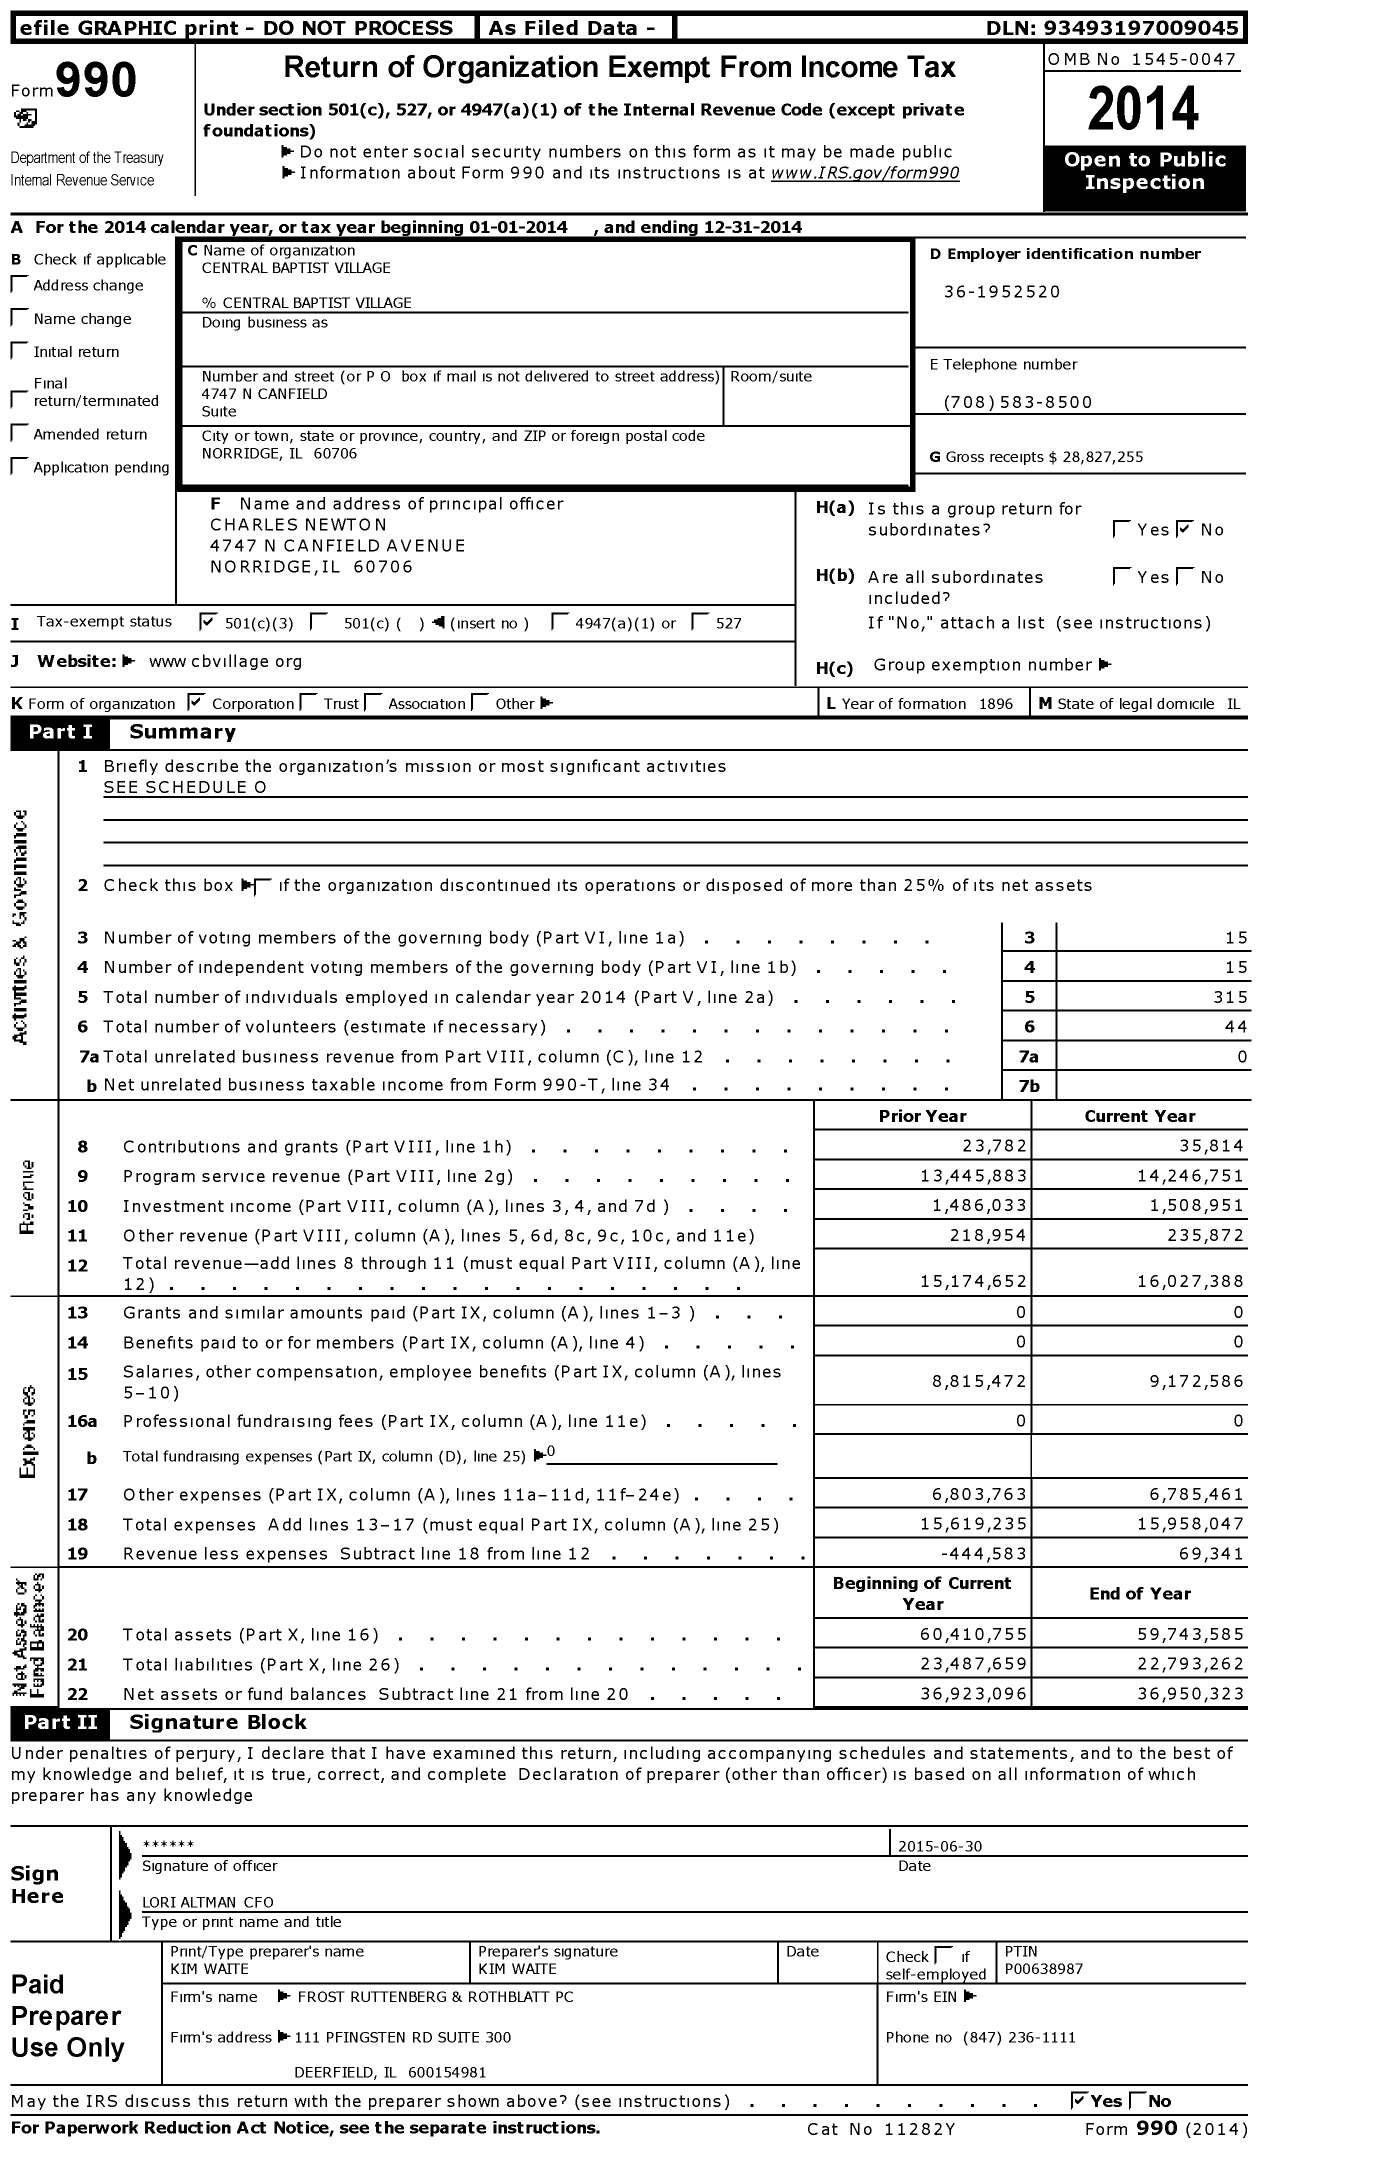 Image of first page of 2014 Form 990 for Central Baptist Village (CBV)